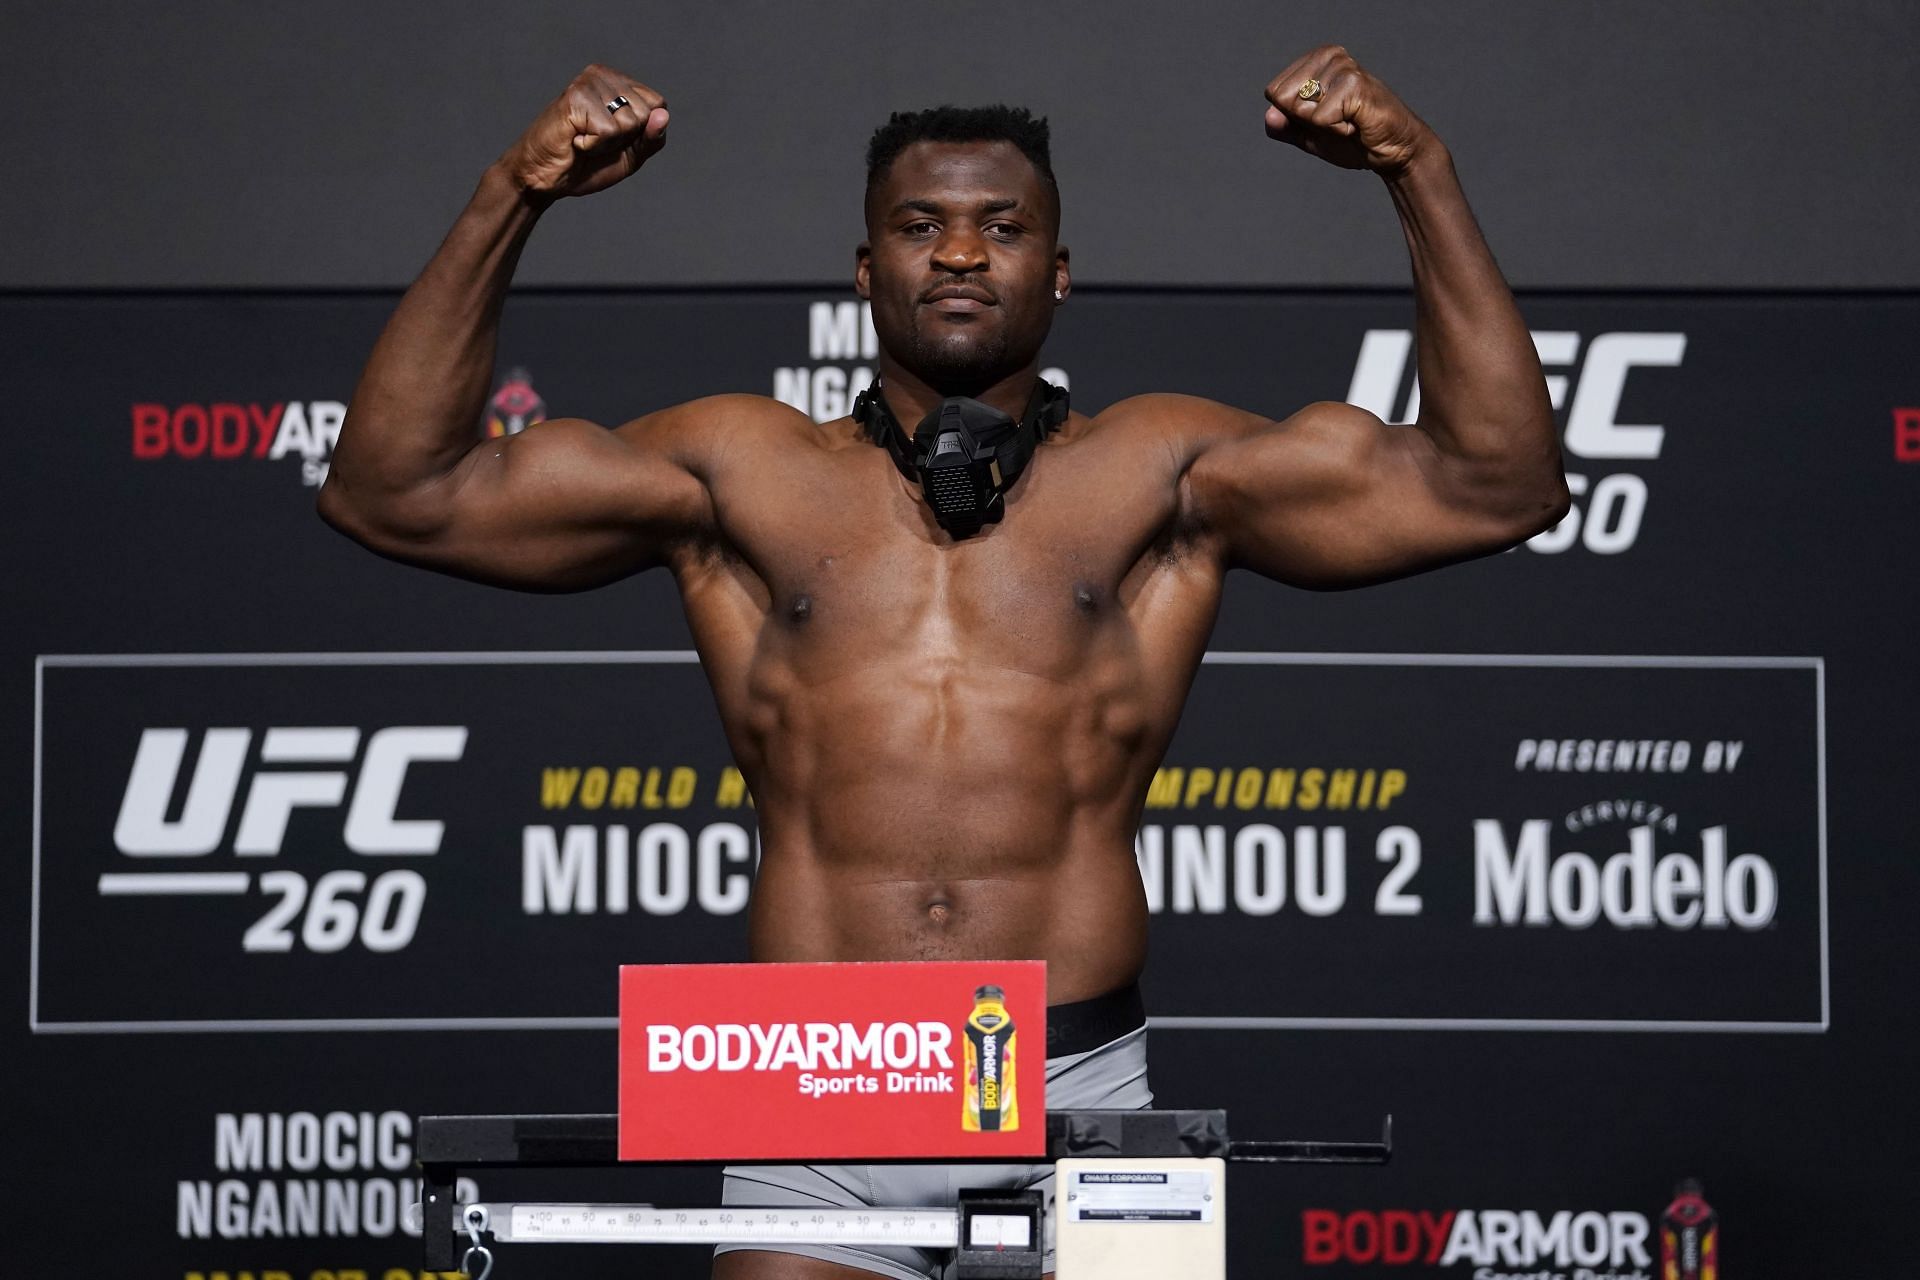 Ngannou has 5 knockouts in his last 5 fights